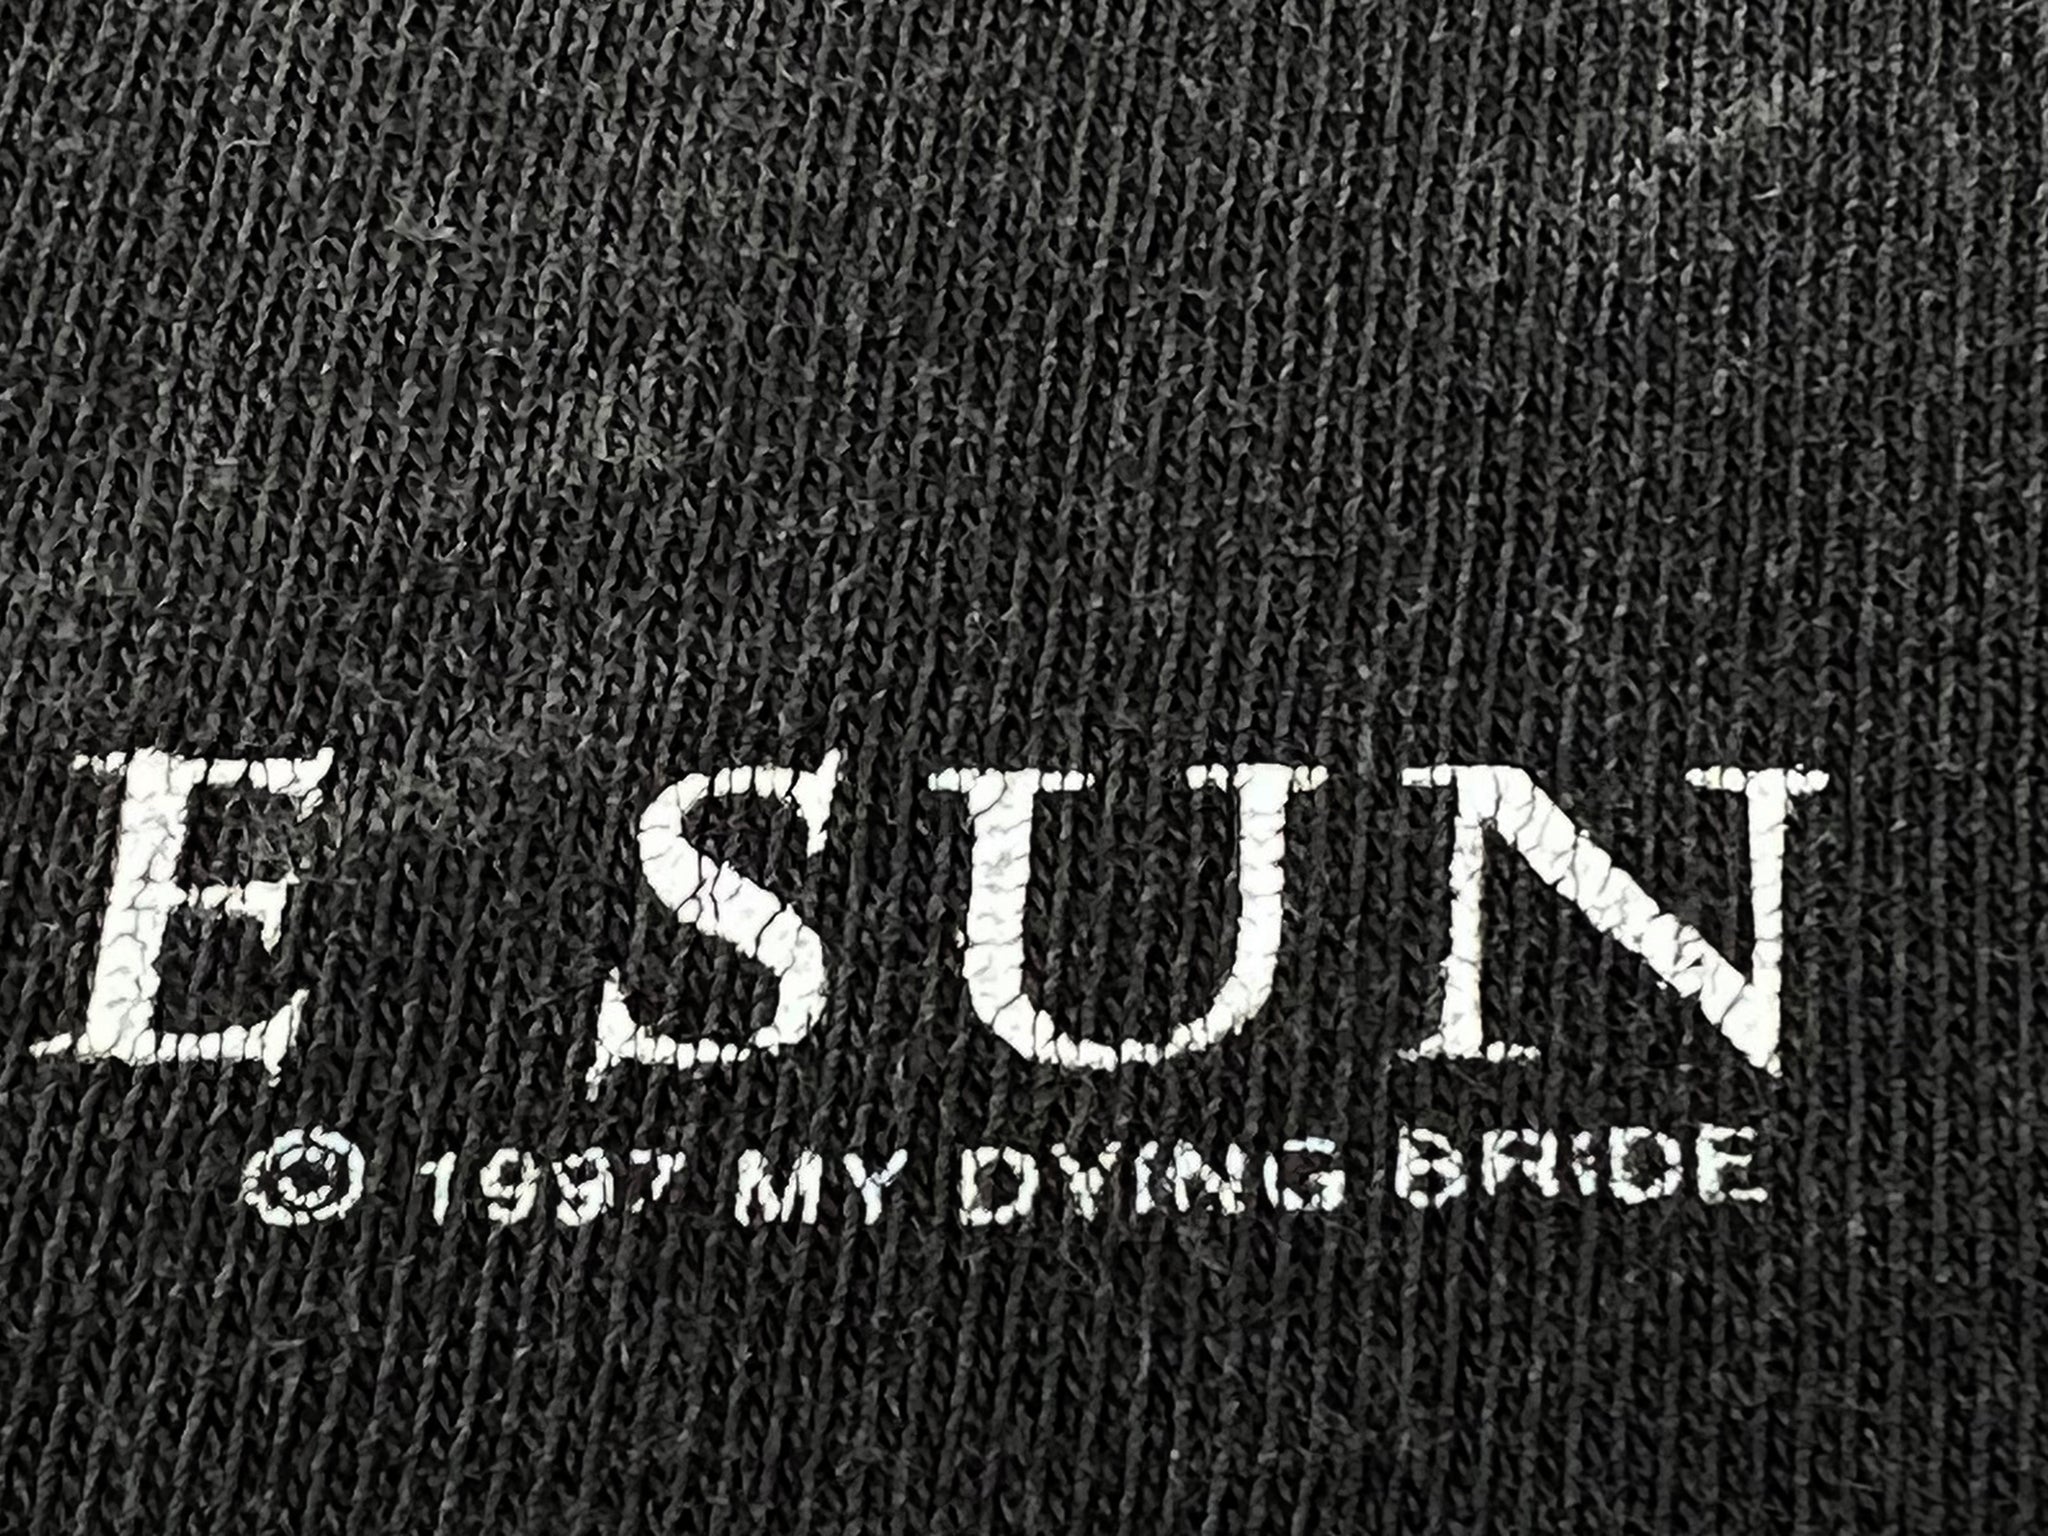 My Dying Bride 'Like Gods of the Sun' T-Shirt